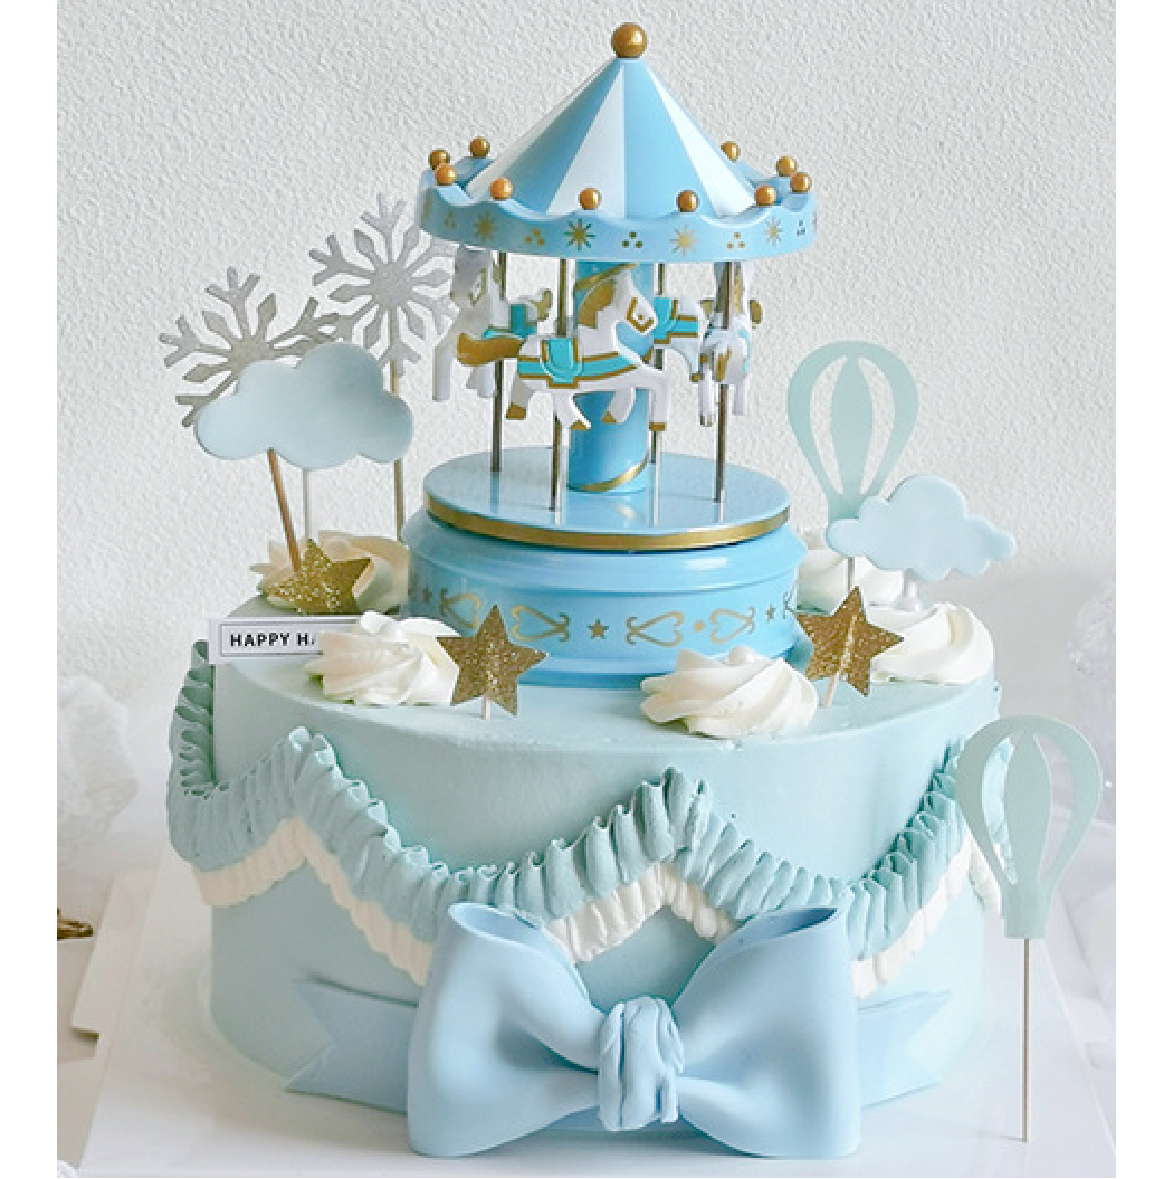 Cake Topper Decorations  - 'Musical Carousel' - Blue - Rampant Coffee Company